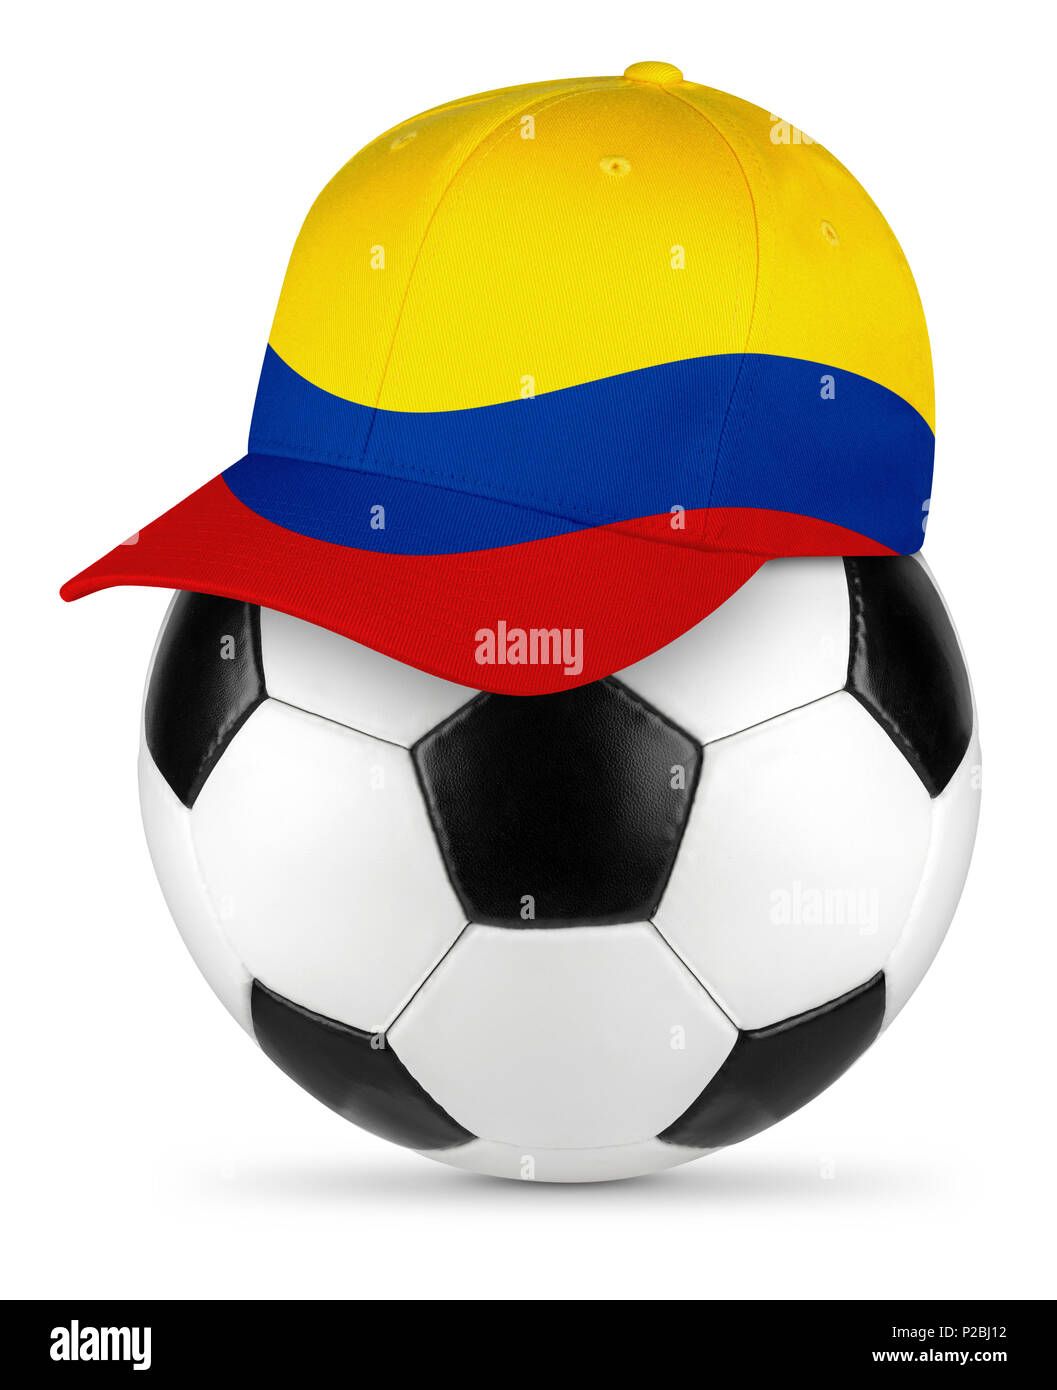 Classic black white leather soccer ball columbia columbian flag baseball fan cap isolated background sport football concept Stock Photo